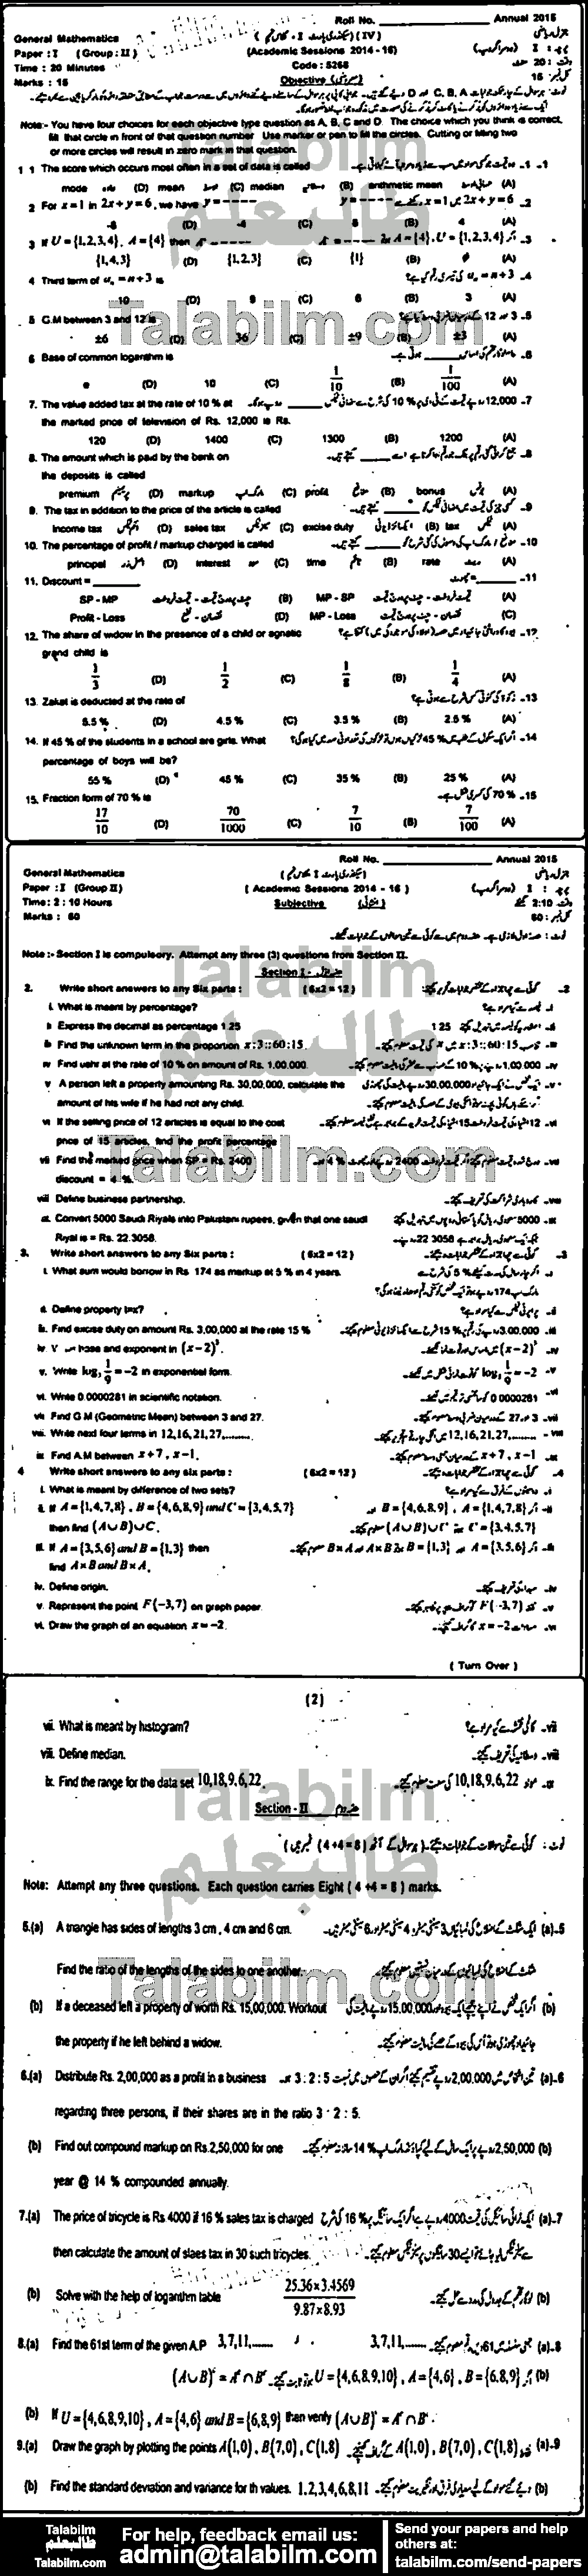 General Math 0 past paper for 2015 Group-II